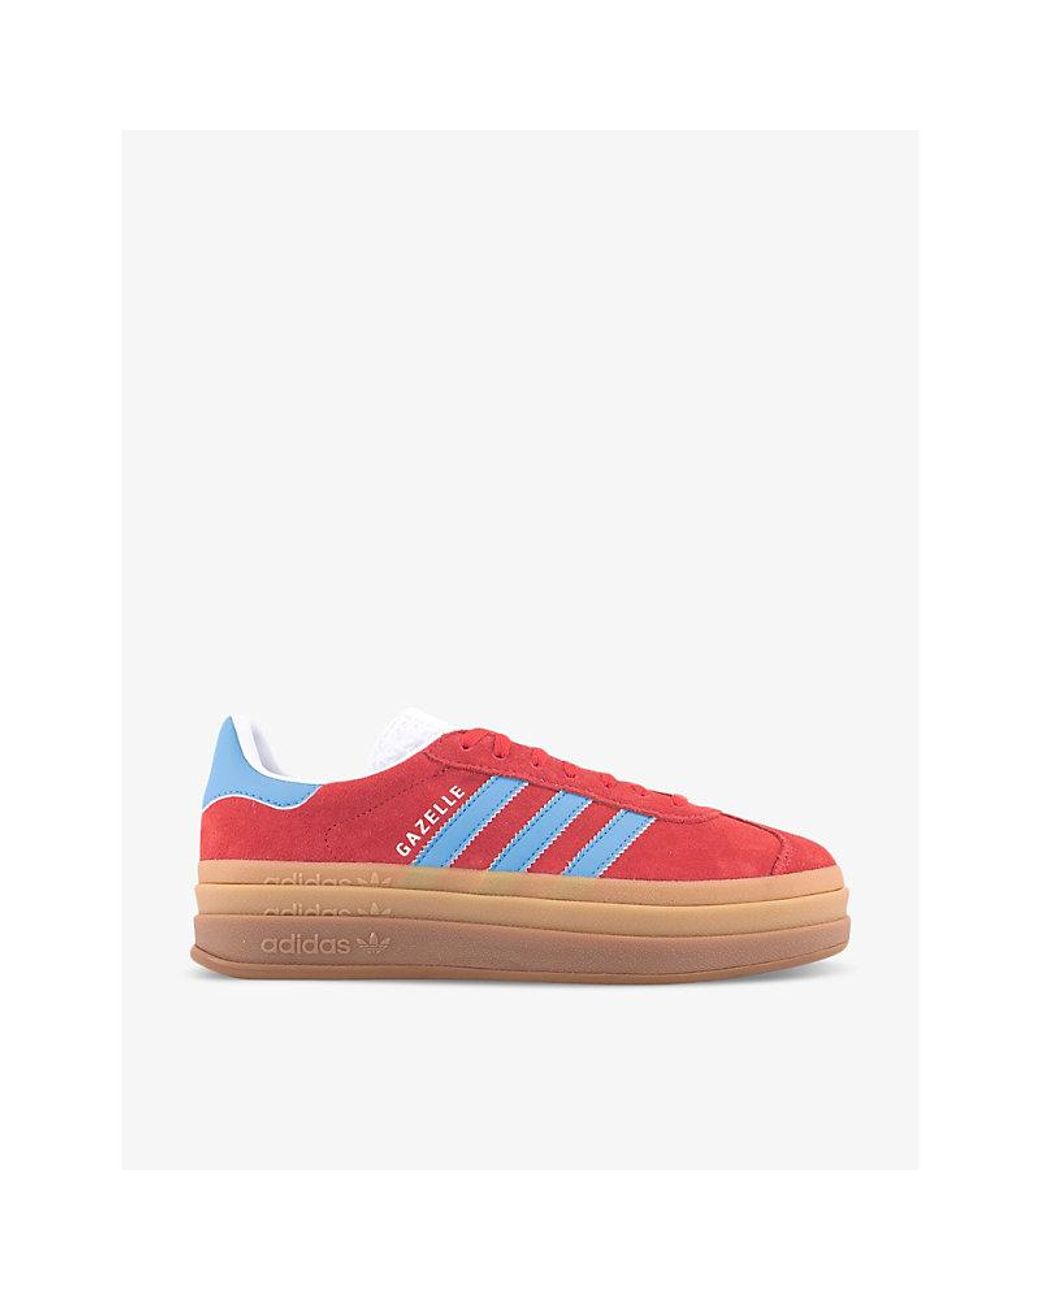 adidas Gazelle Bold 3-stripes Suede Low-top Platform Trainers in Red | Lyst